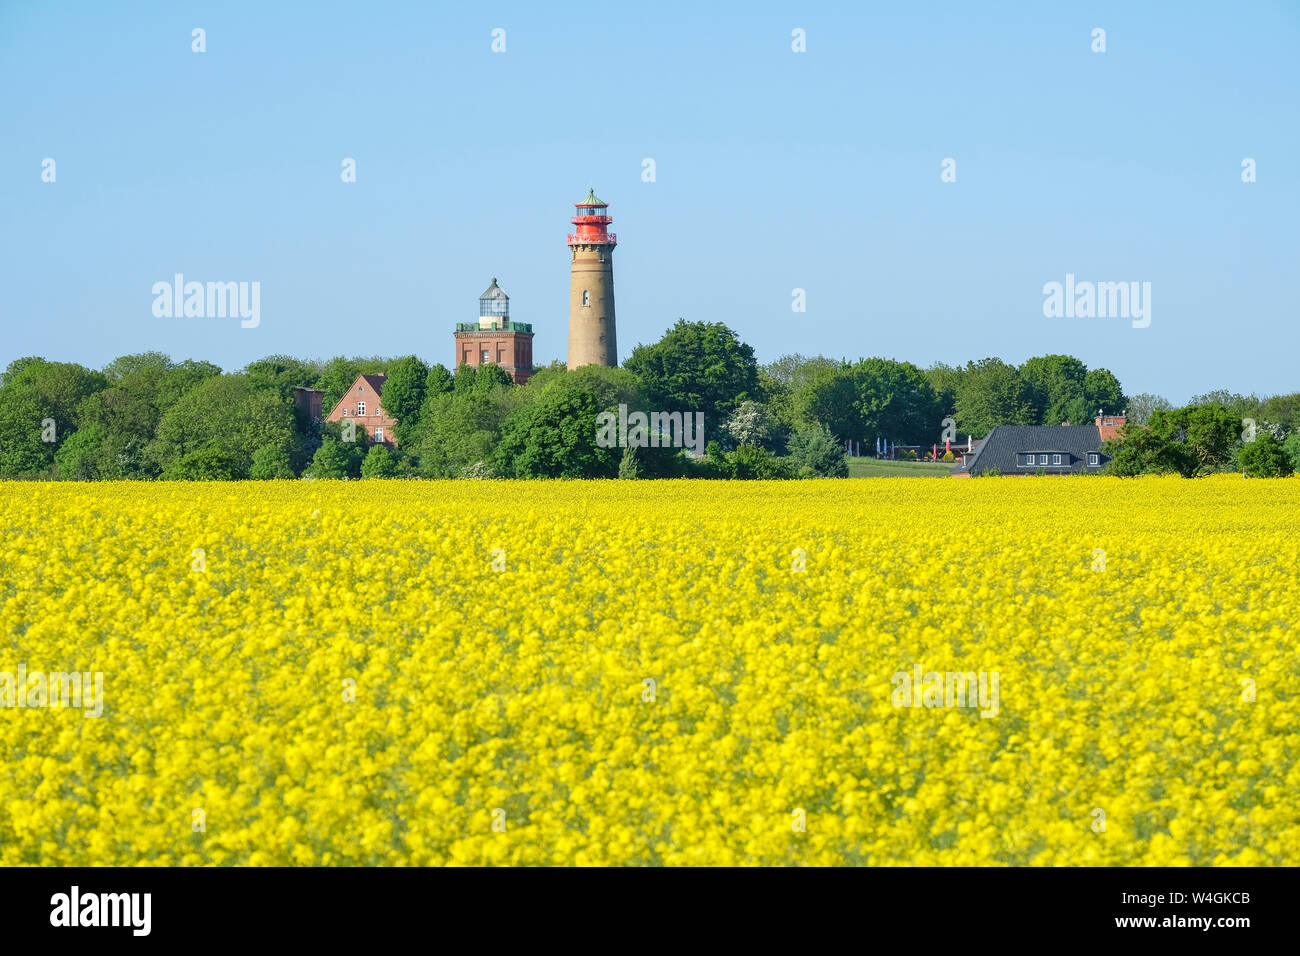 Germany, Mecklenburg-Western Pomerania, Rugen, Schinkel tower and the new lighthouse near Kap Arkona, rape field in the foreground Stock Photo